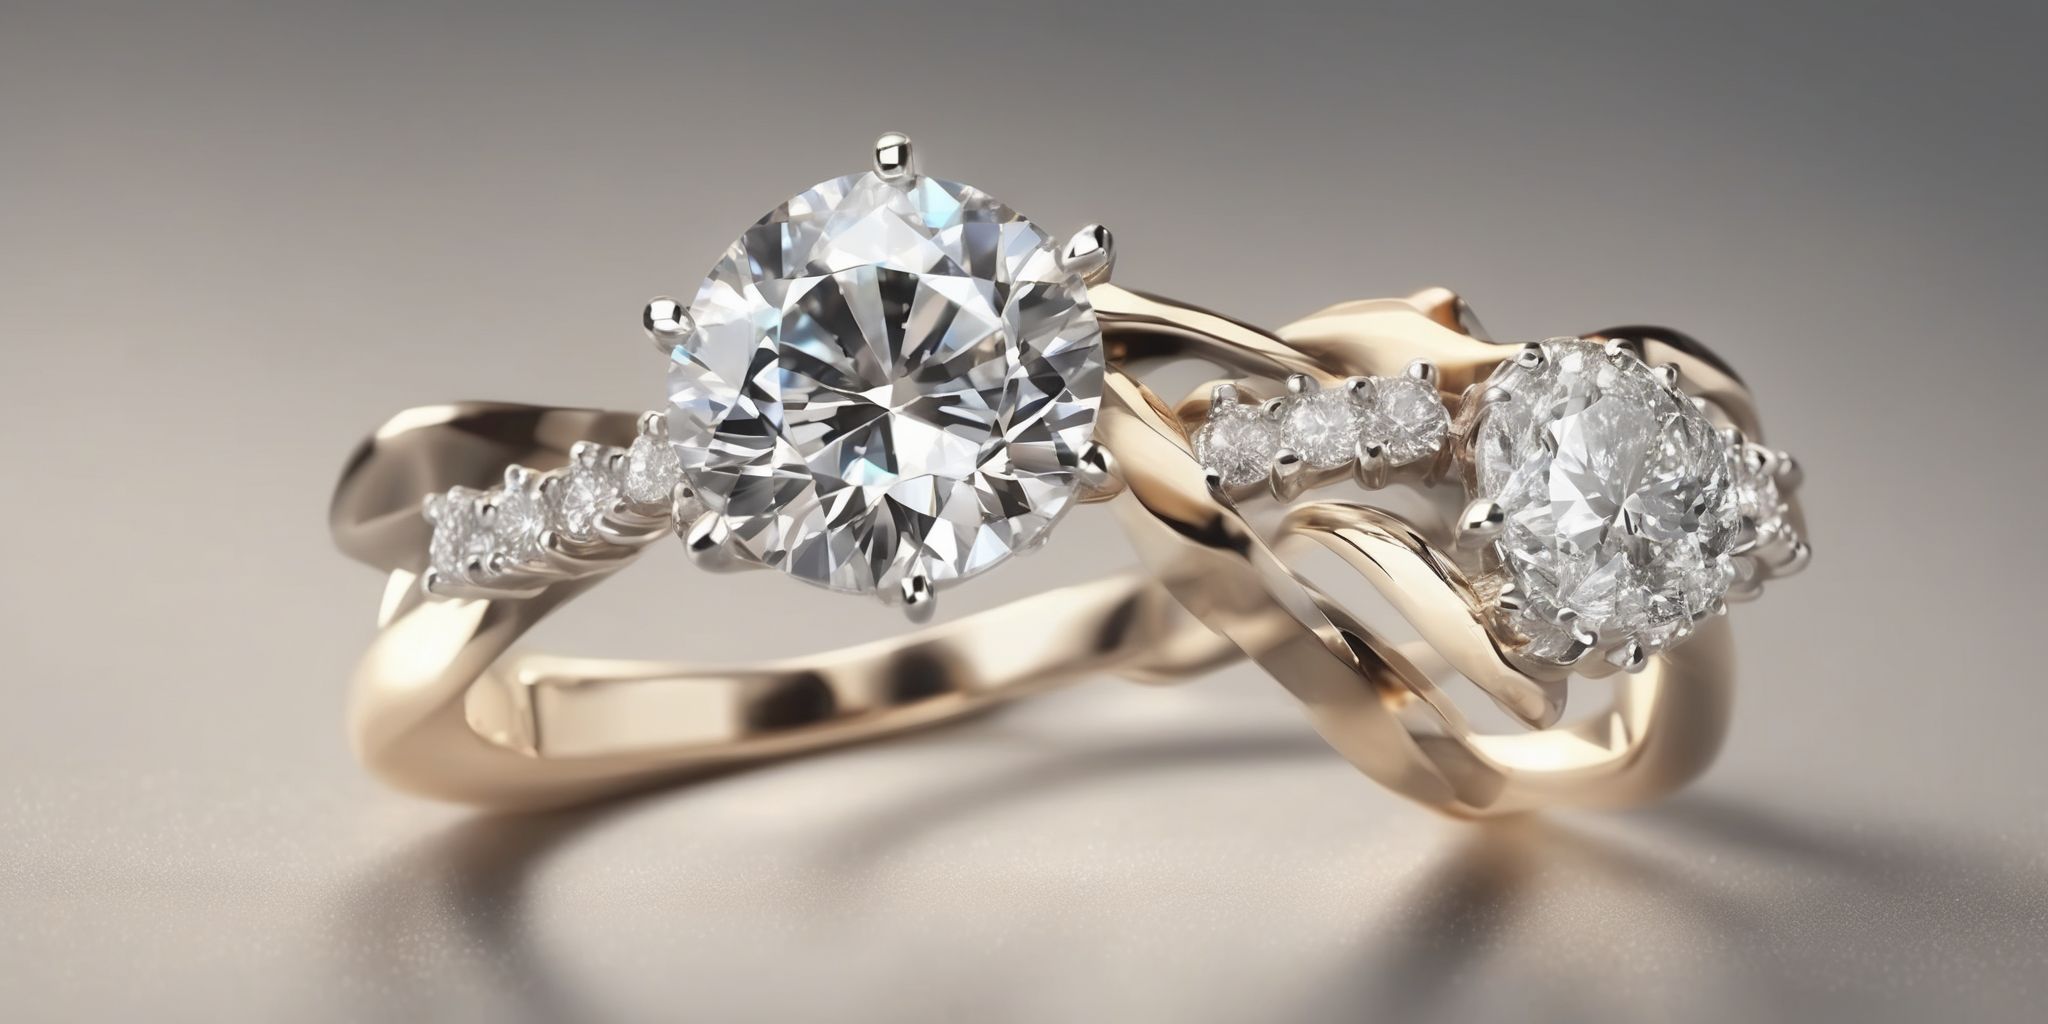 Diamond ring  in realistic, photographic style